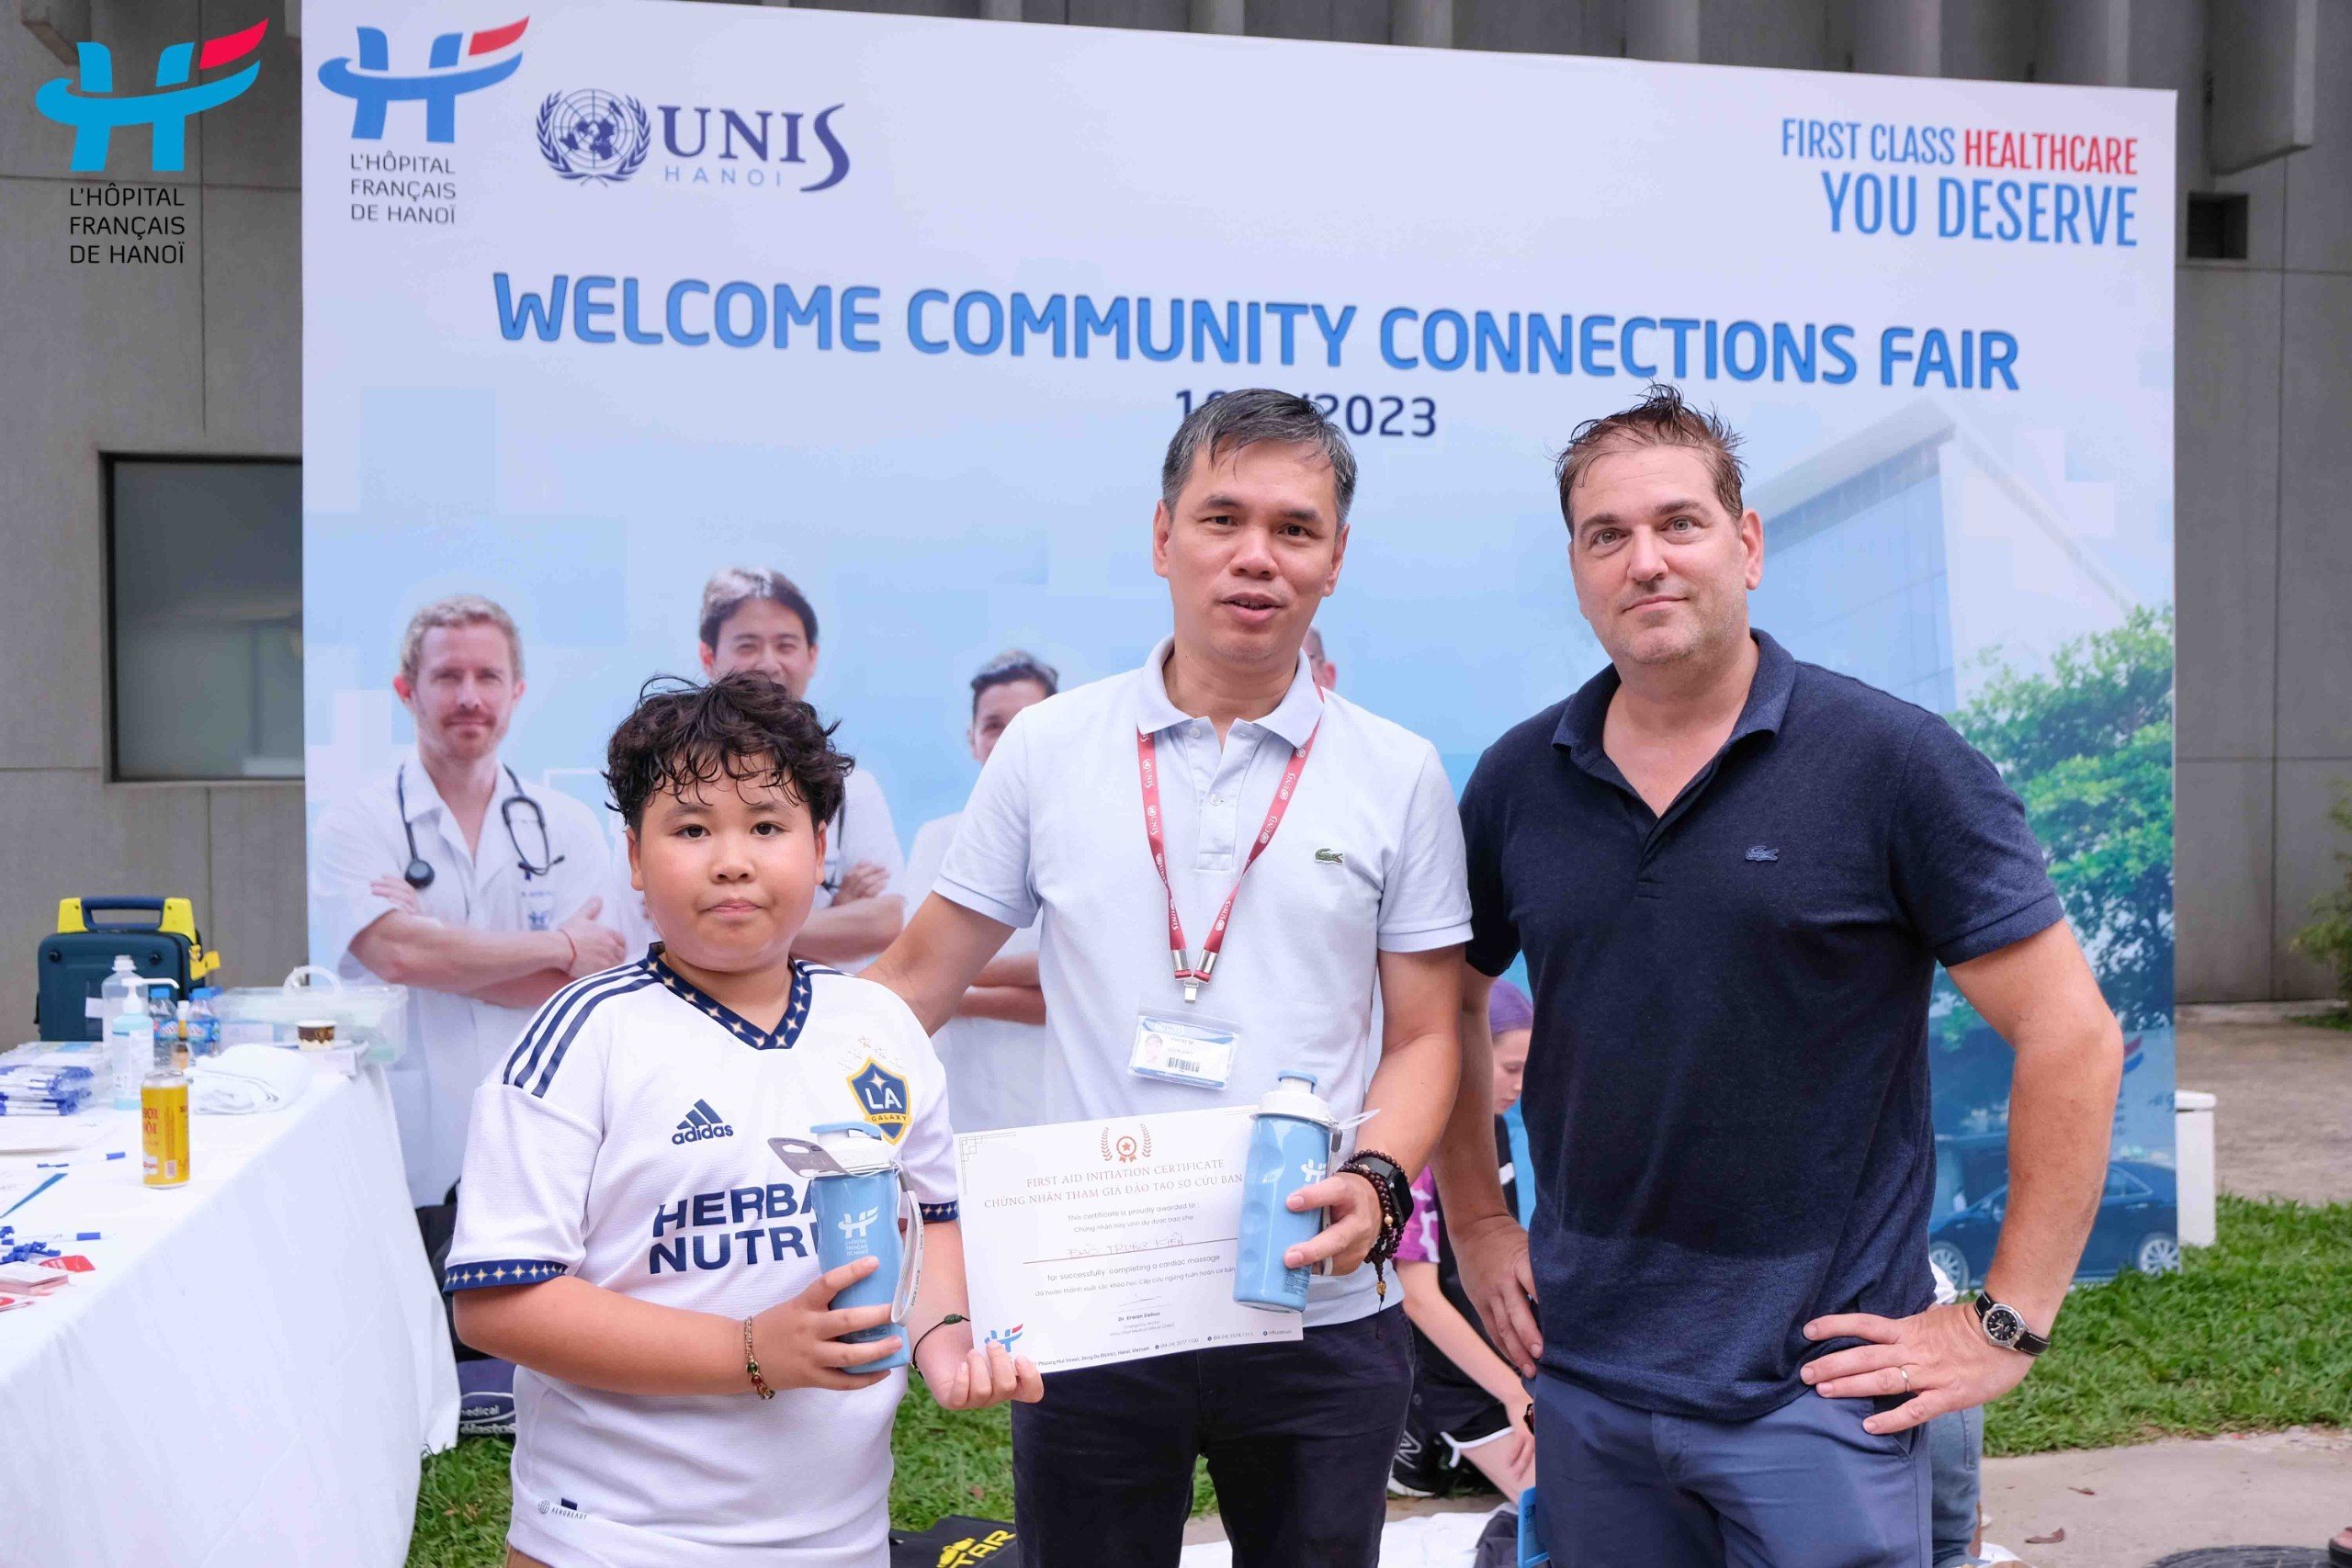 Dr. Erwan Debuc, Chief Medical Officer of HFH, presents certificates and gifts to the families who participated in the First Aid Course at the UNIS Community Connection Fair